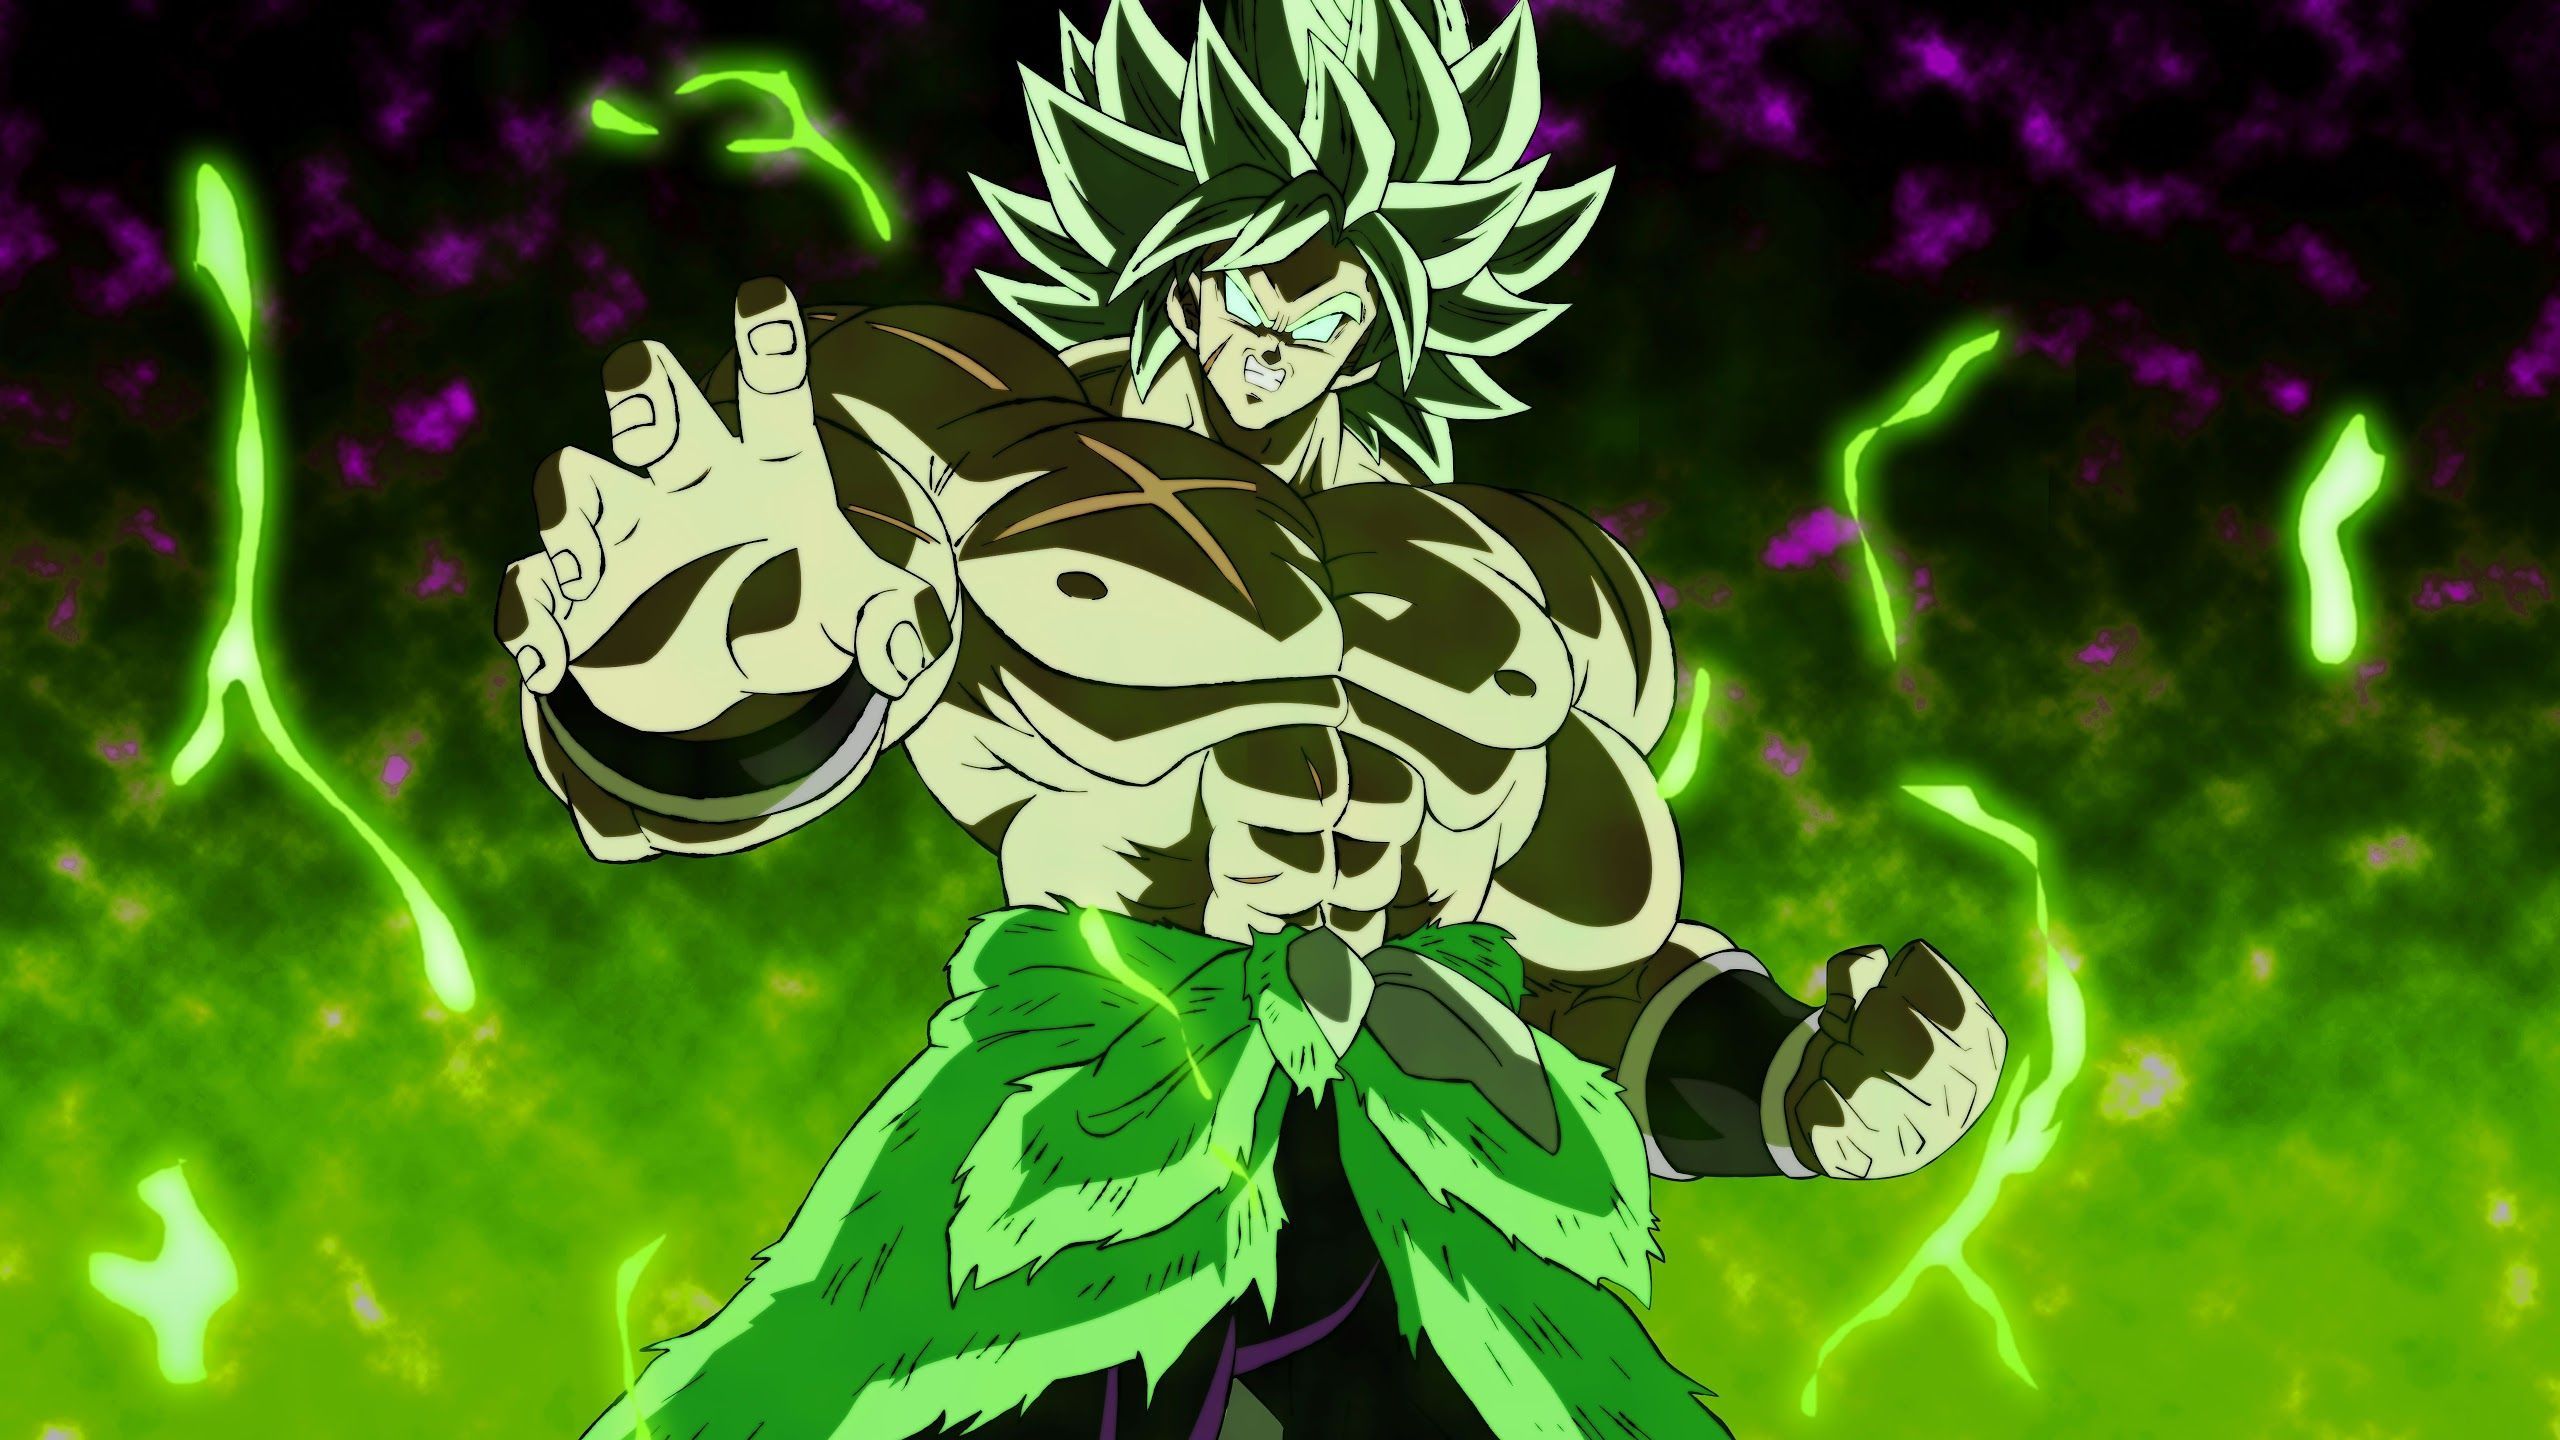 Broly Wallpapers